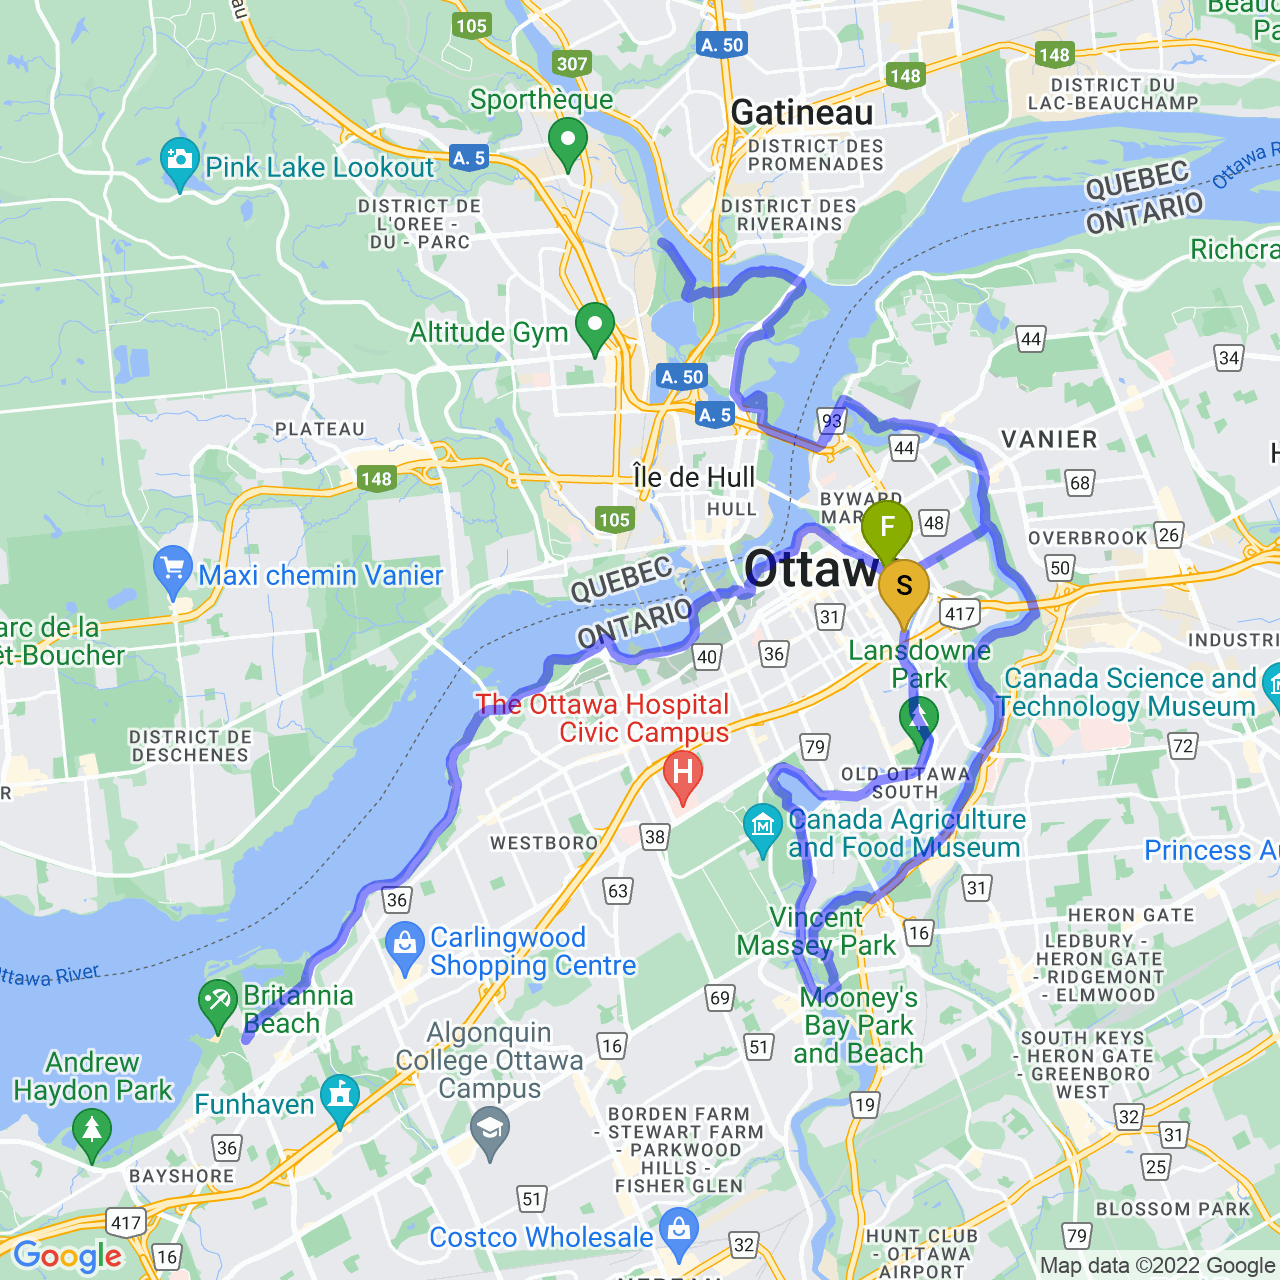 map of Long Ride